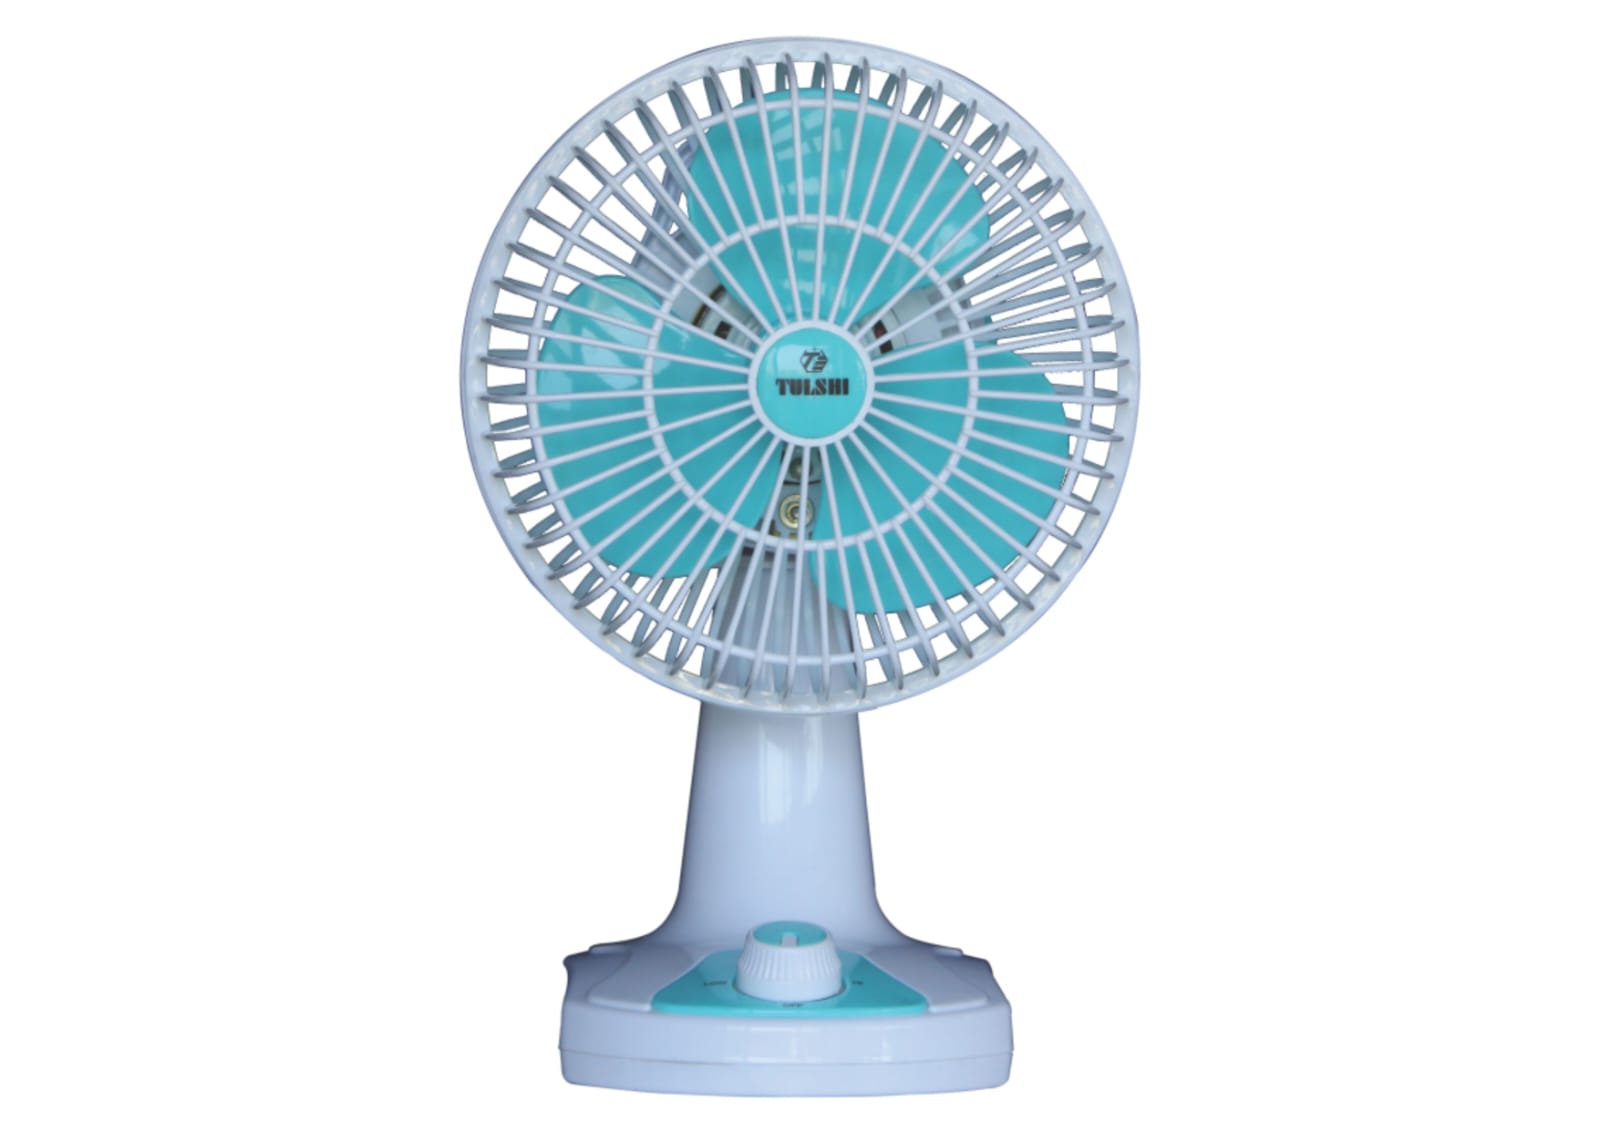 https://tulshielectronics.com/storage/images/products/A.P UTILITY FAN 6,9,12.77_643d10a72ac60.jpg